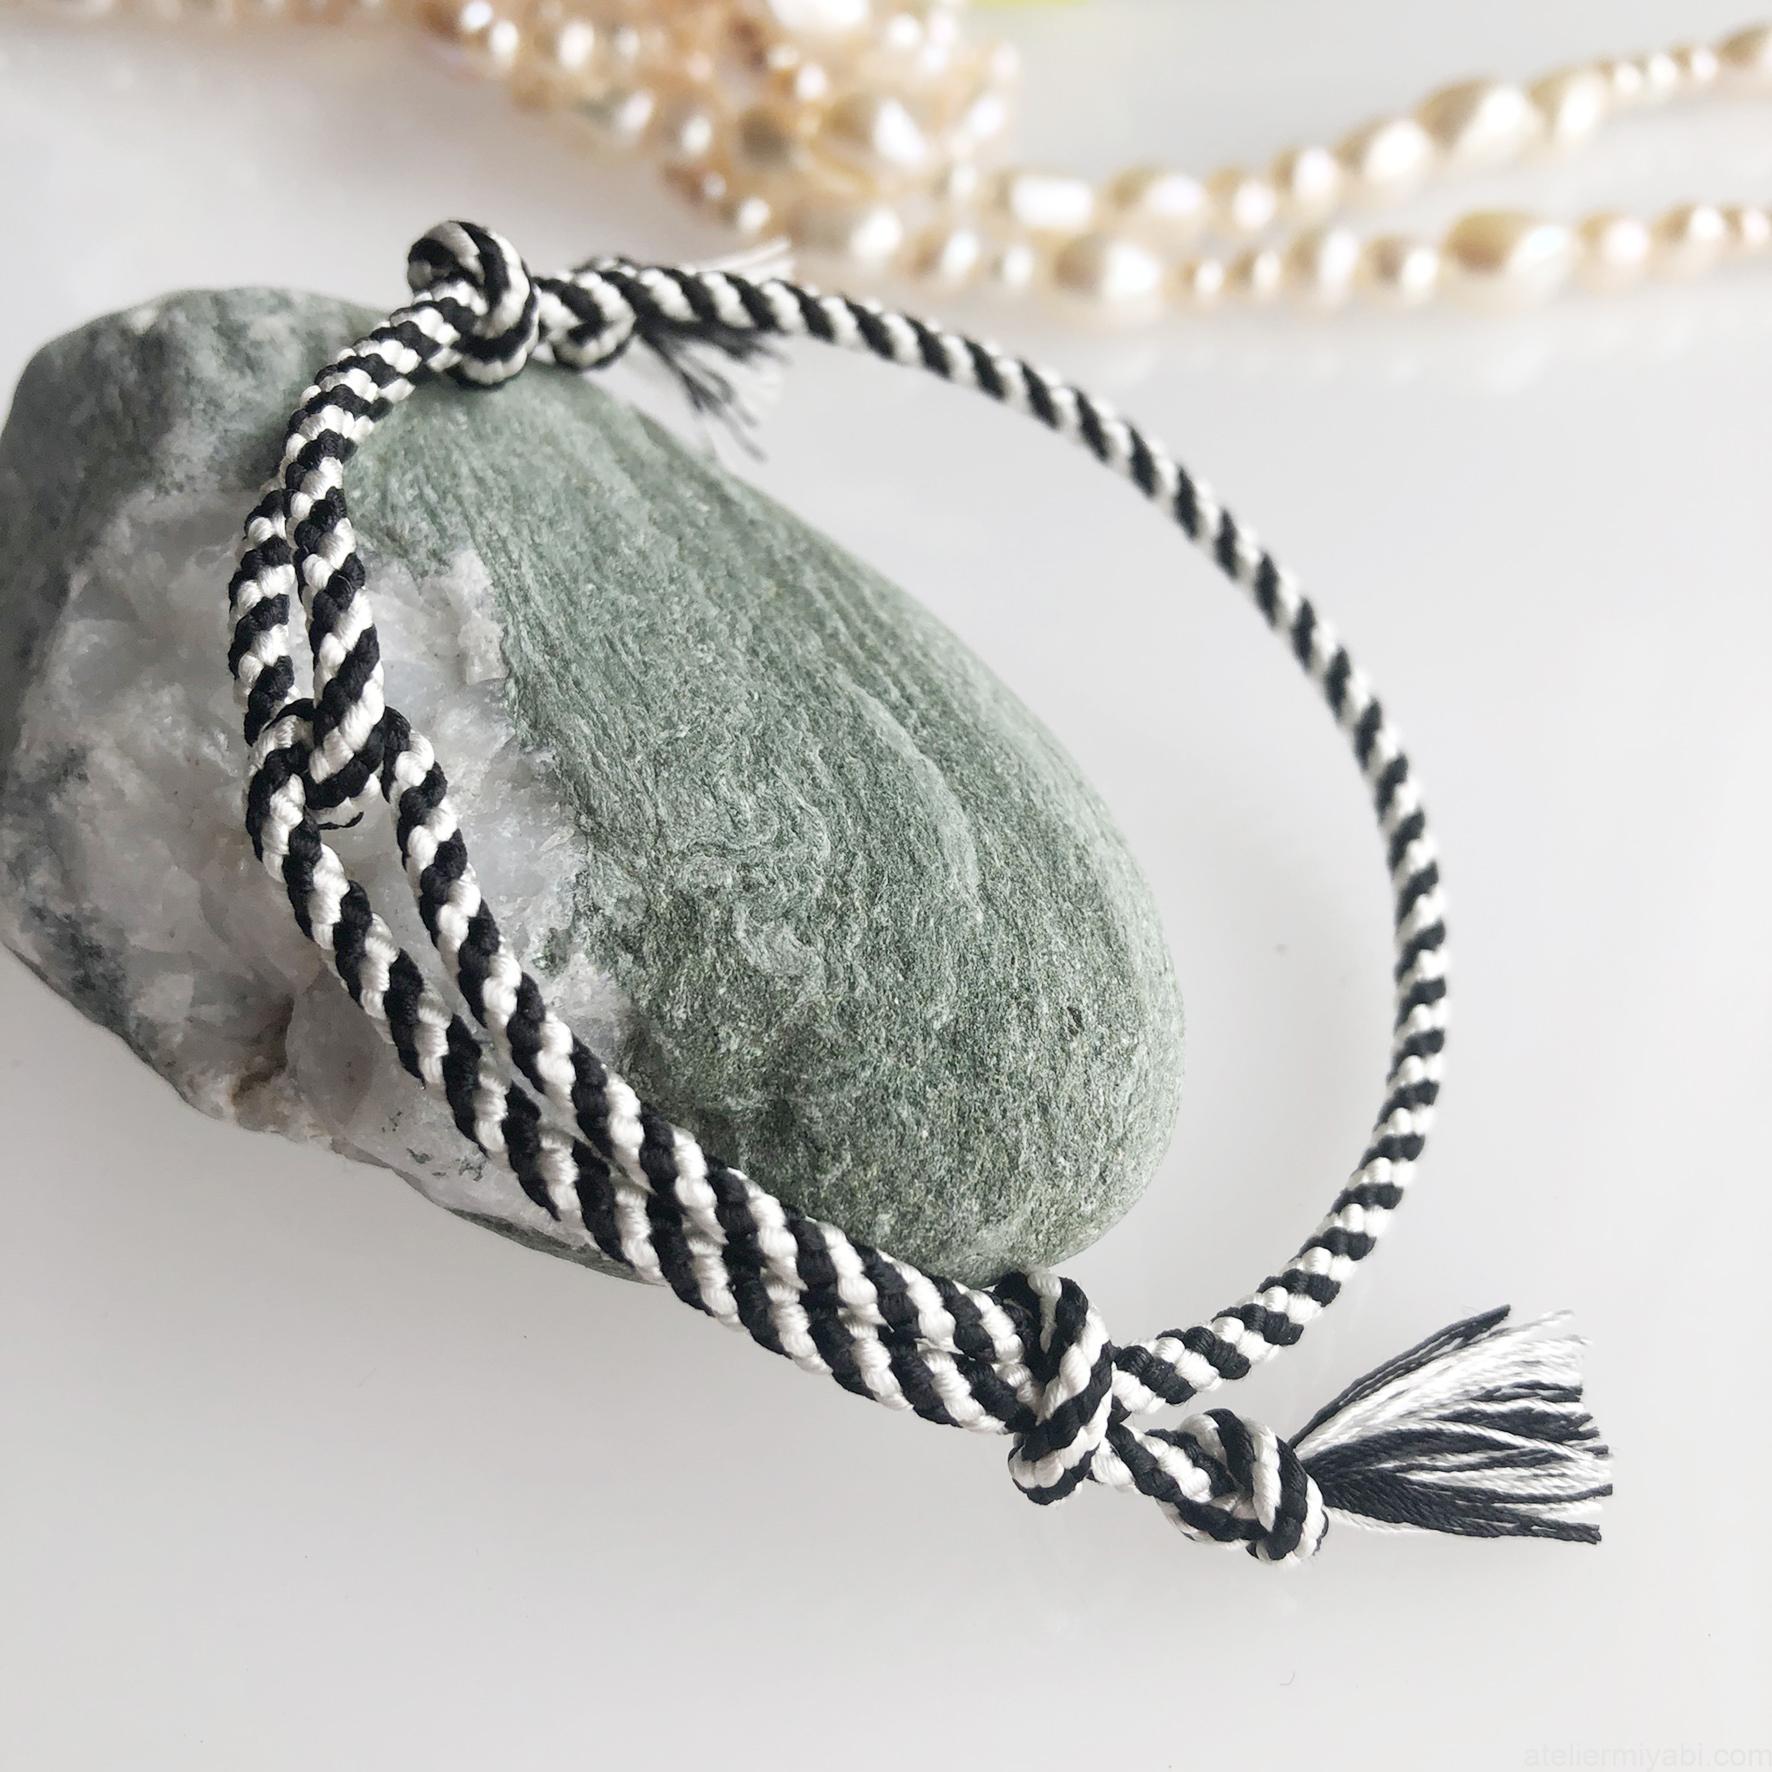 Japanese silk cord necklace - A handcrafted piece of jewelry